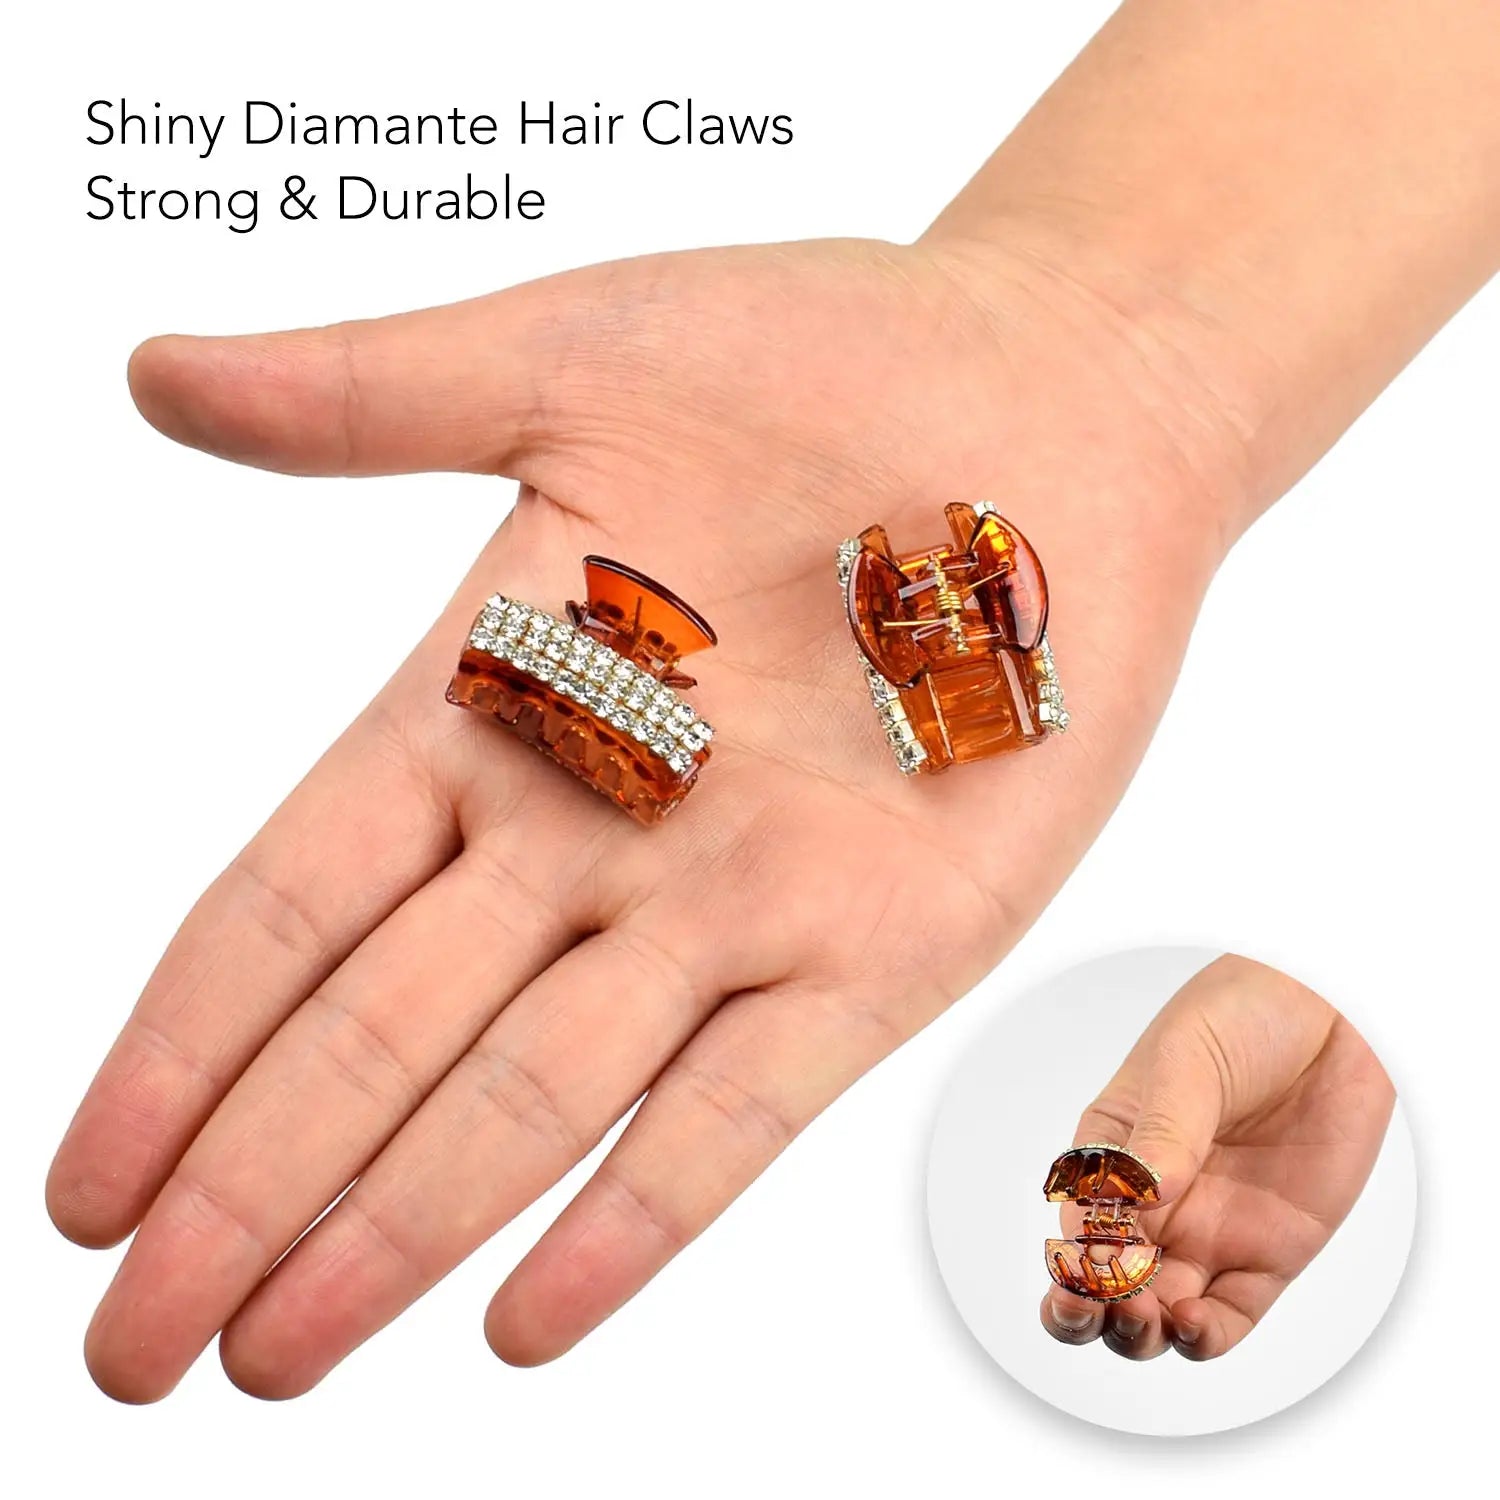 Two rectangle hair claw rings held in hand, Diamante Embellished Accessory